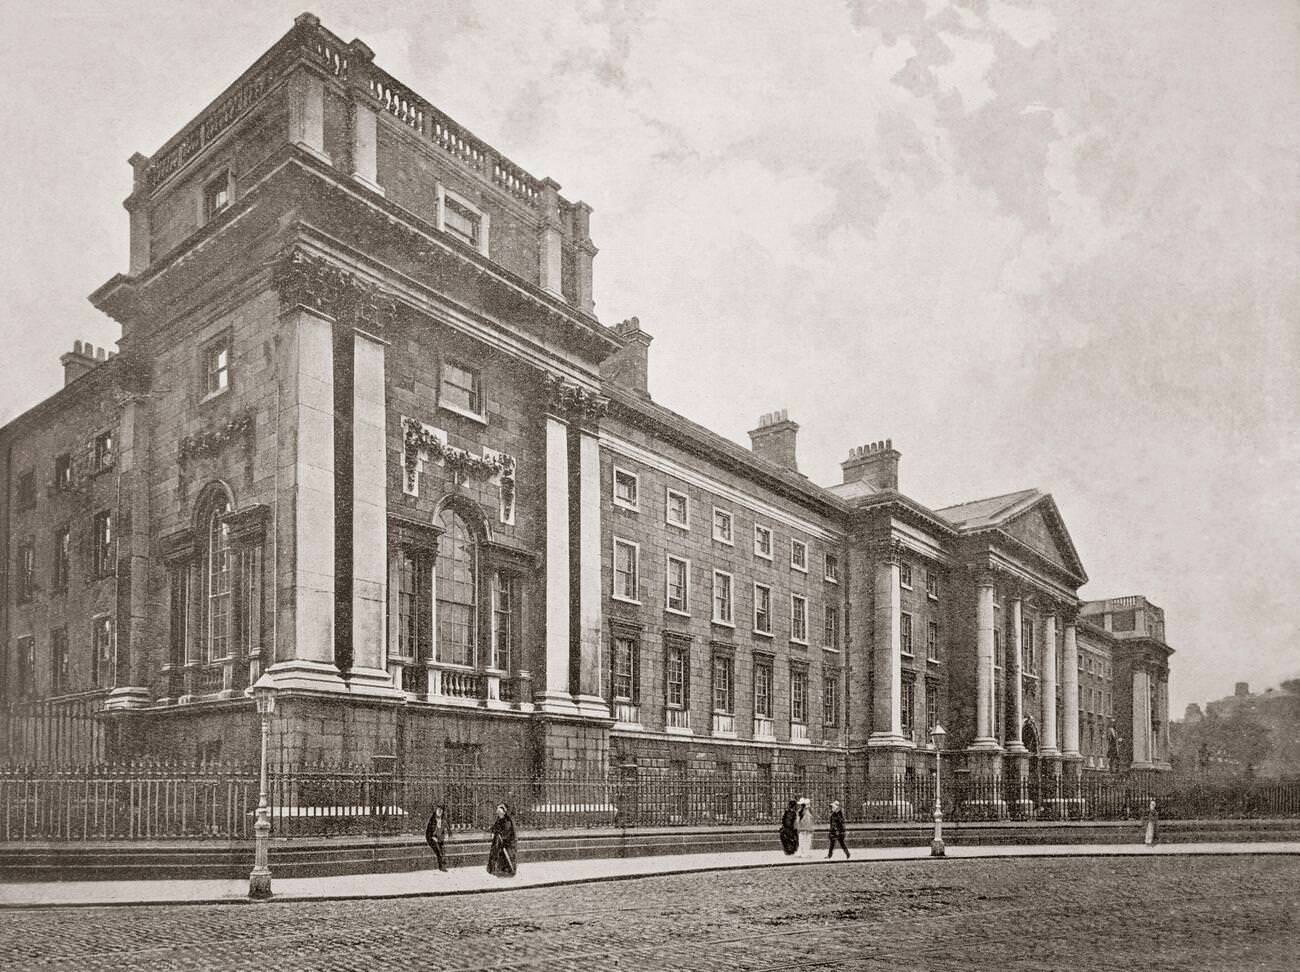 The Regent House, that acts as the central entrance to the campus of Trinity College in Dublin,